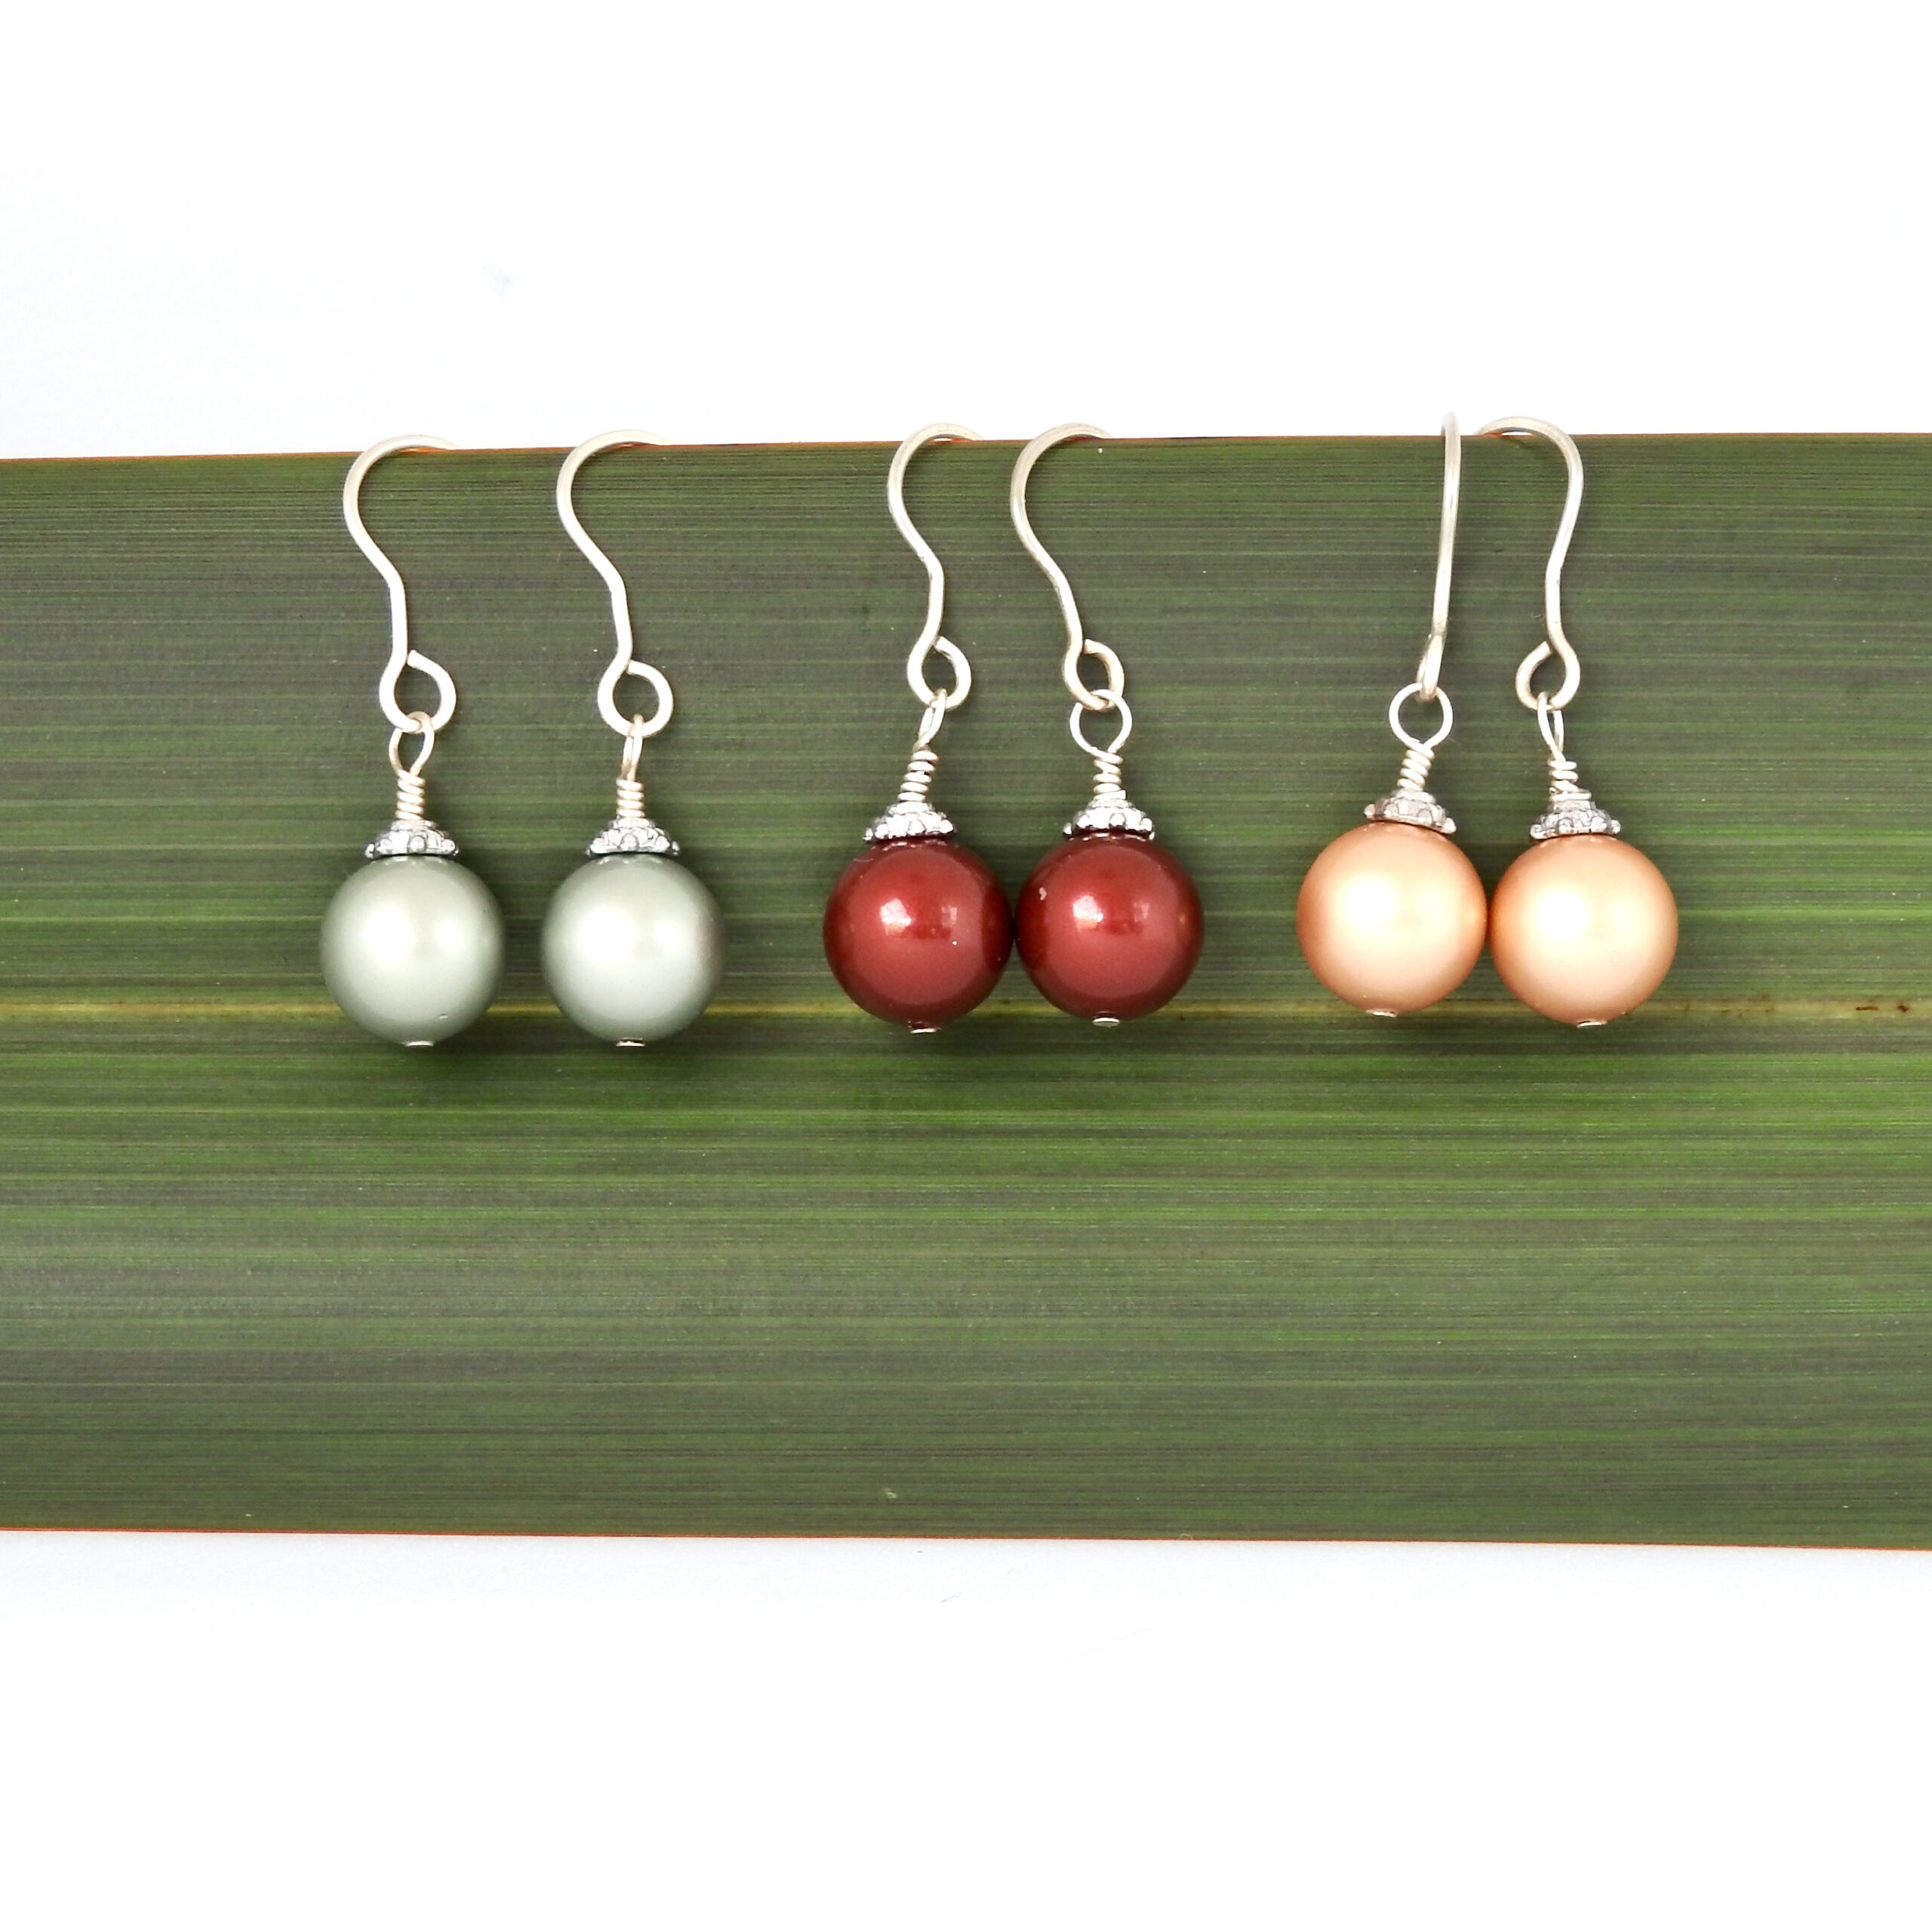 Christmas Bauble Earrings in Green, Burgundy and Gold hanging against flax backdrop